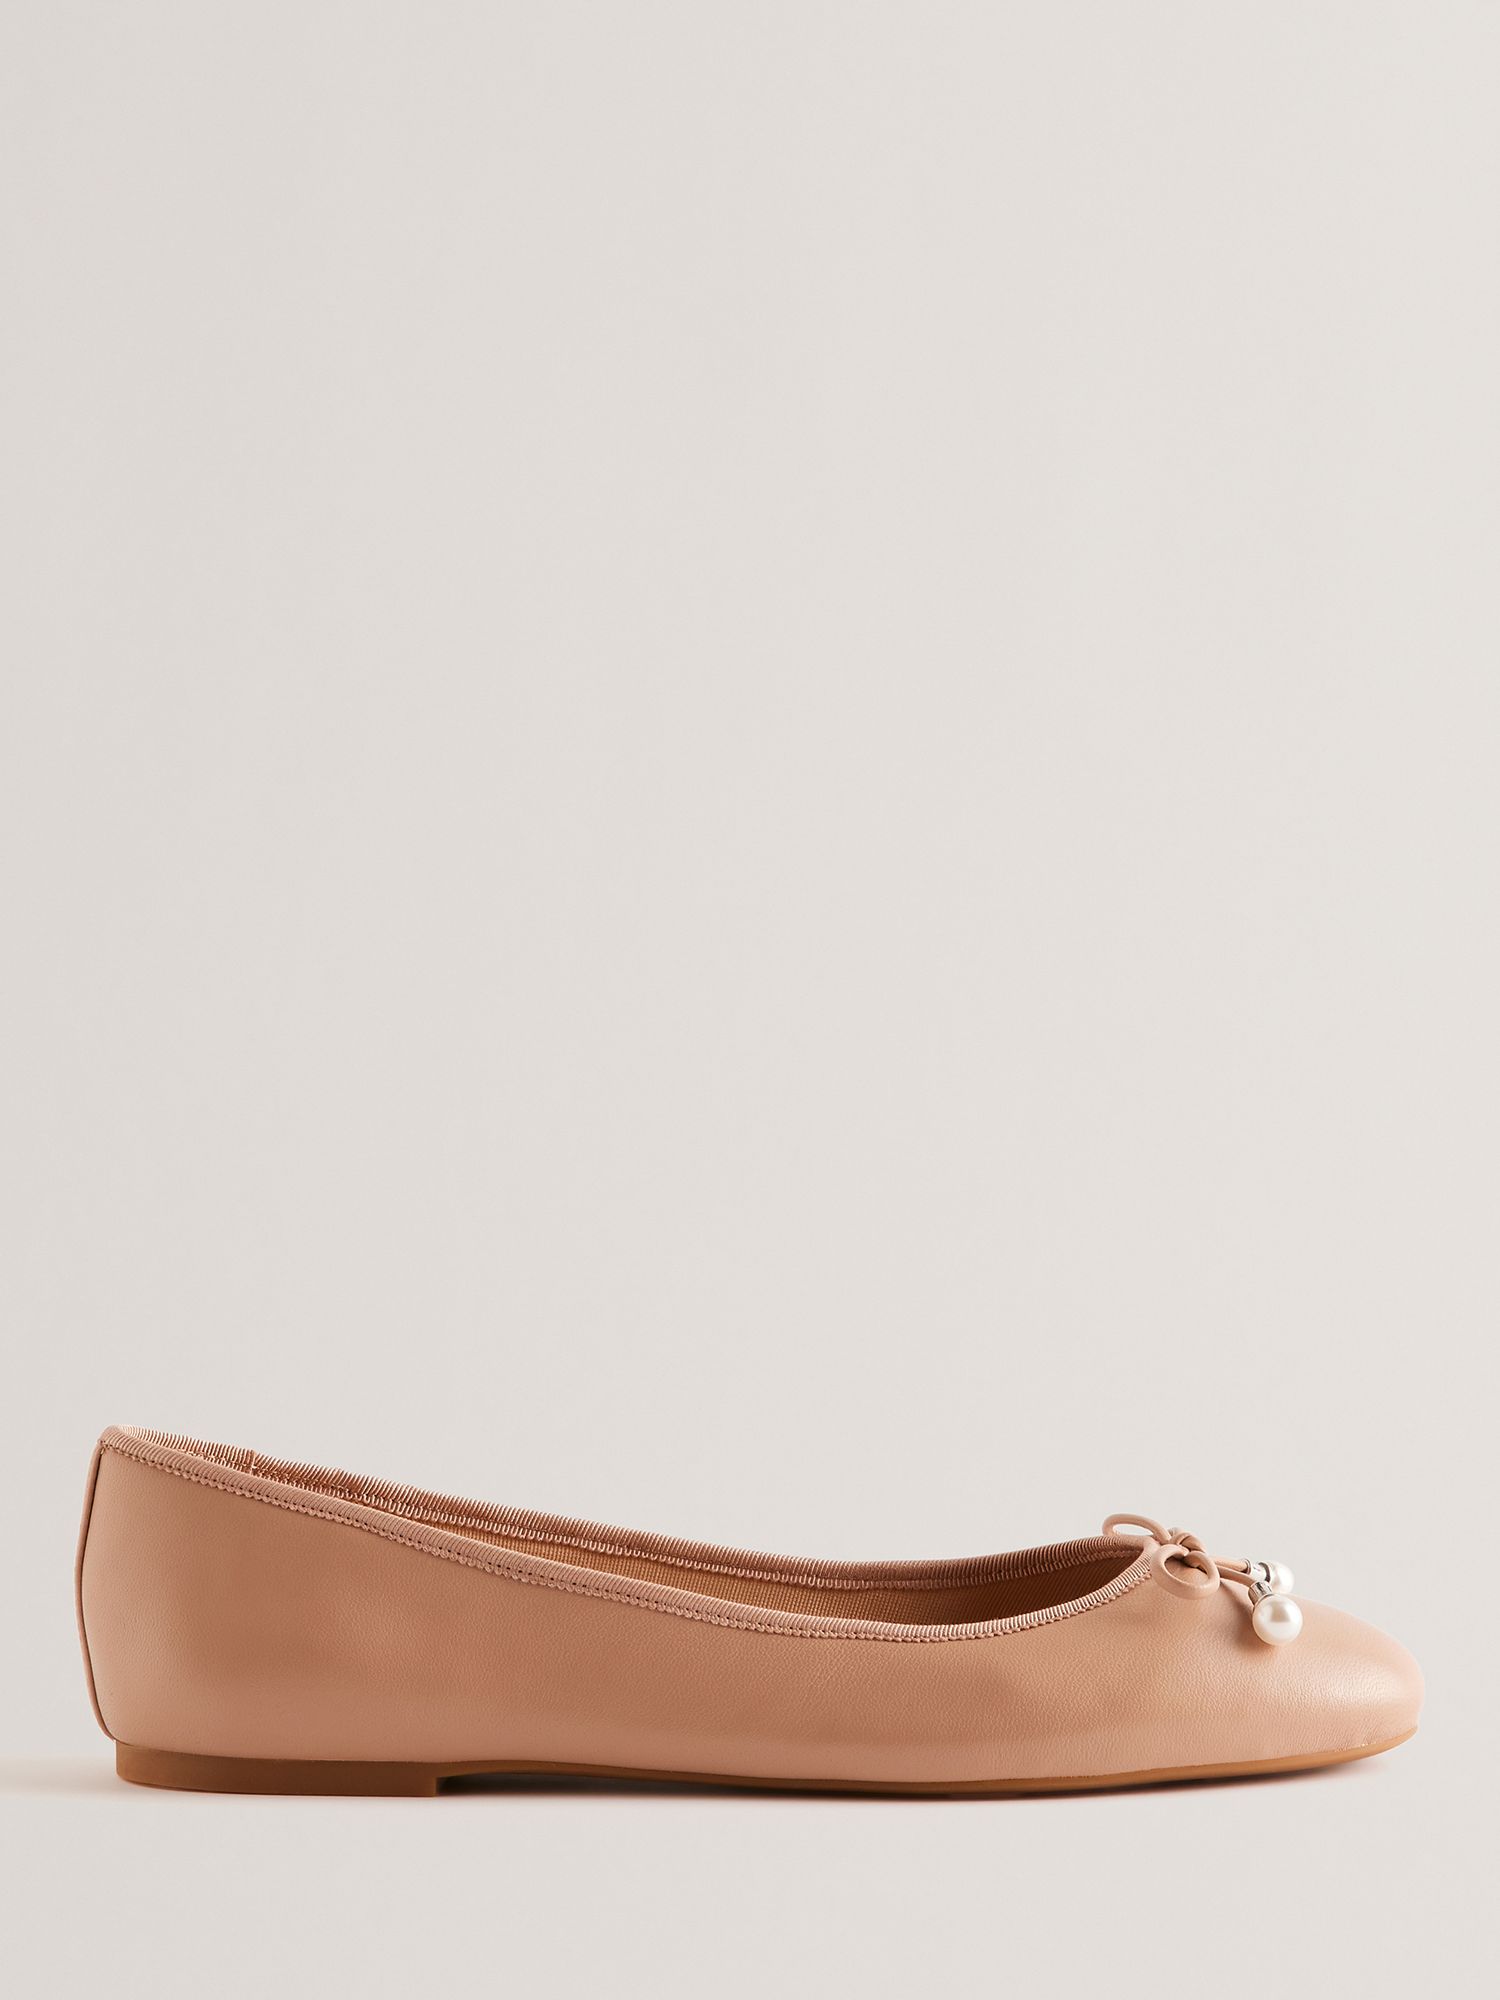 Ted Baker Ayvvah Flat Leather Pumps, Mid Pink, EU41